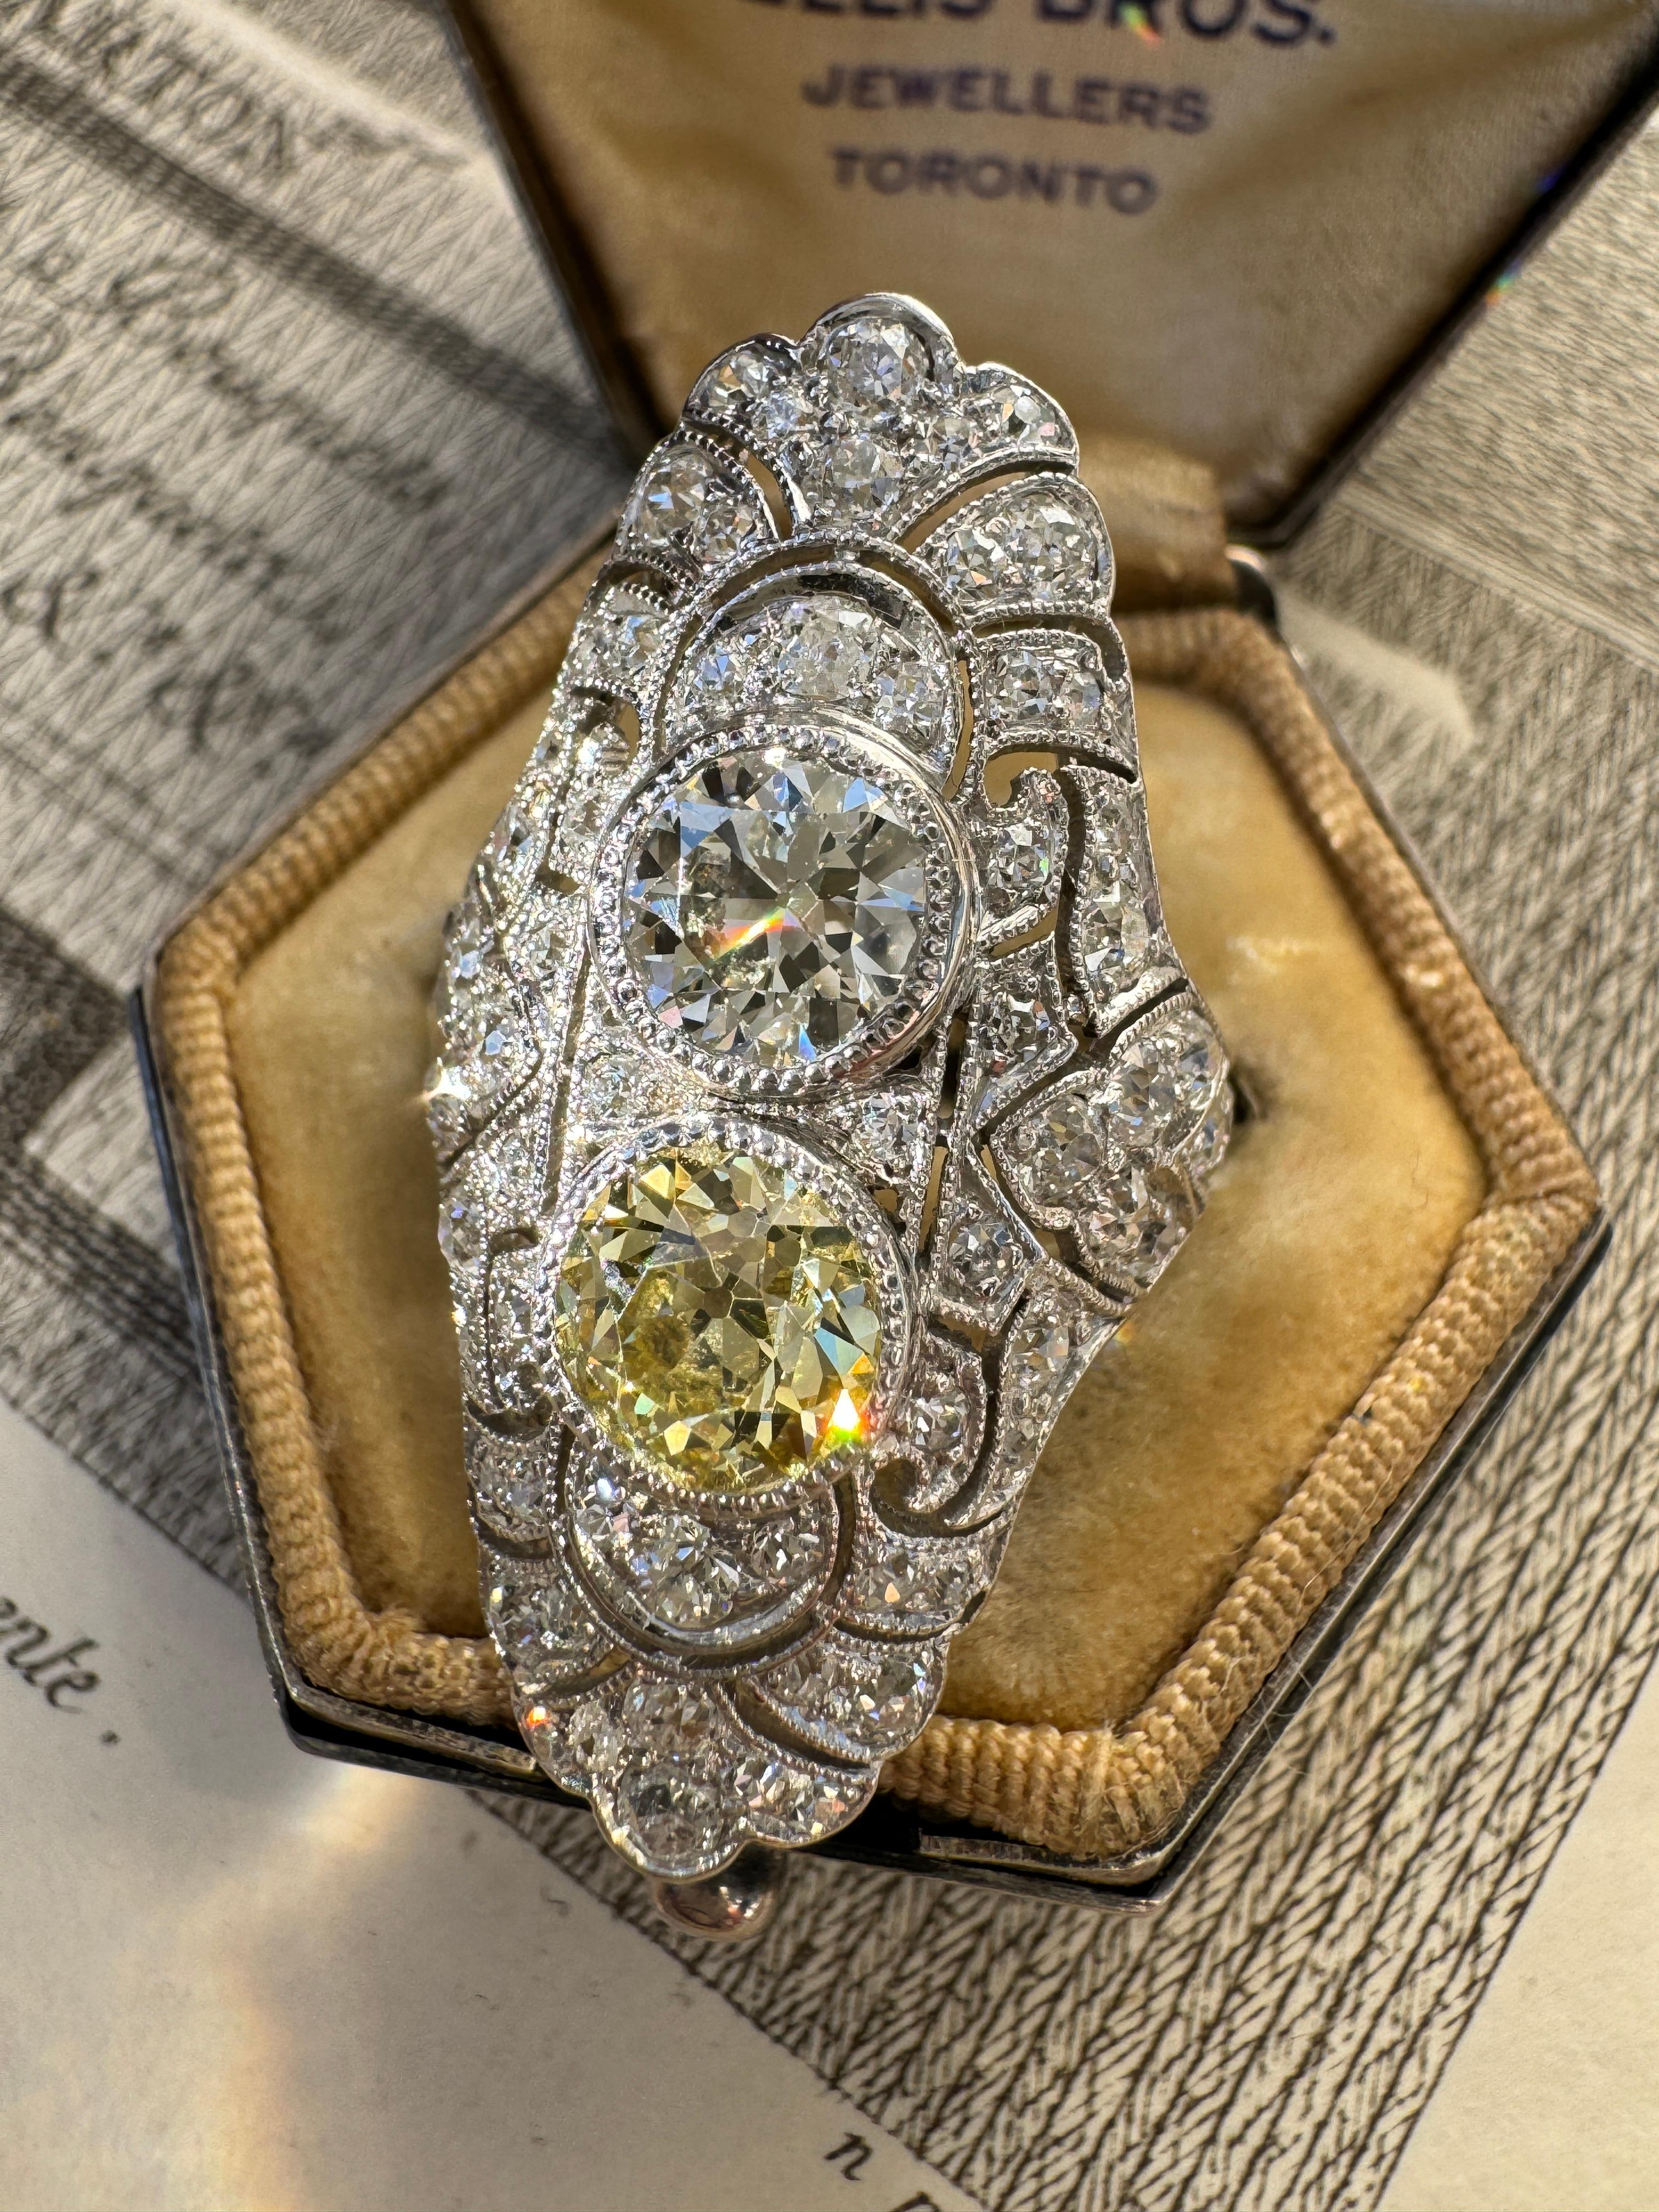 Intricately hand fabricated in platinum around the first or second decade of the twentieth century, this romantic toi et moi ring centers on a blazing fancy yellow old mine-cut diamond, (GIA 1.24 carats with VS2 clarity), and a dazzling 1 carat old